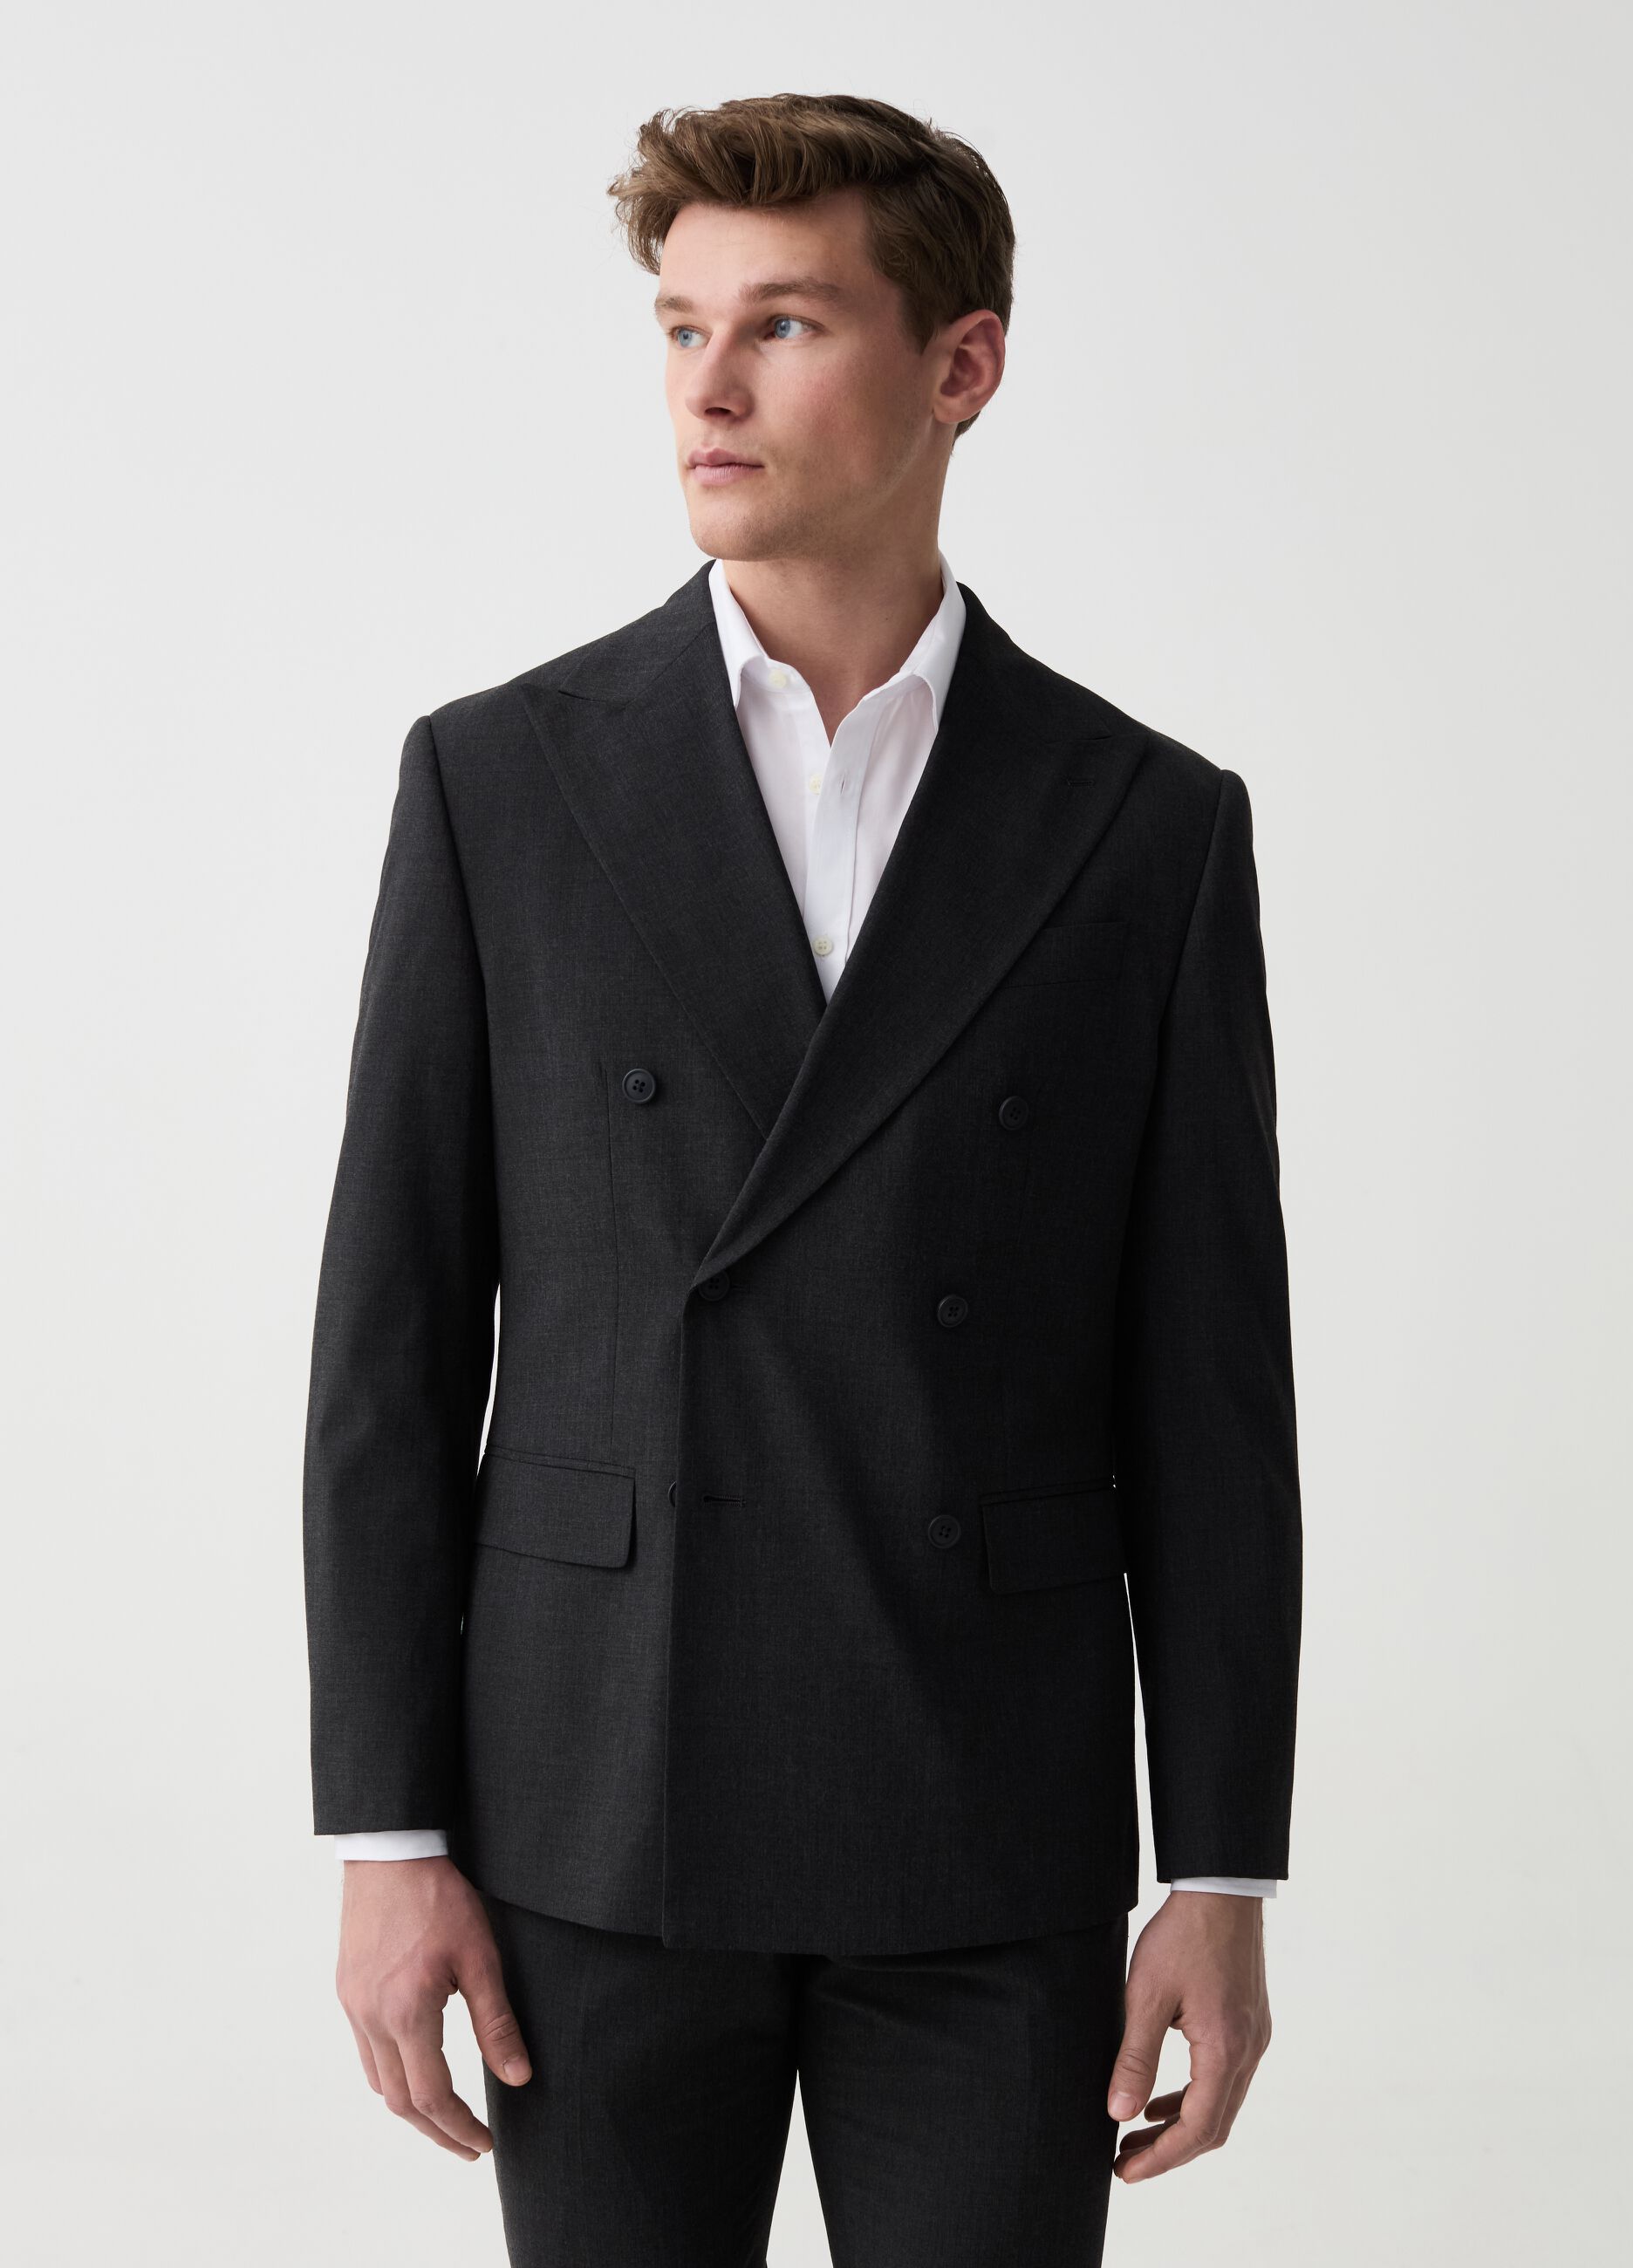 Easy-fit double-breasted suit